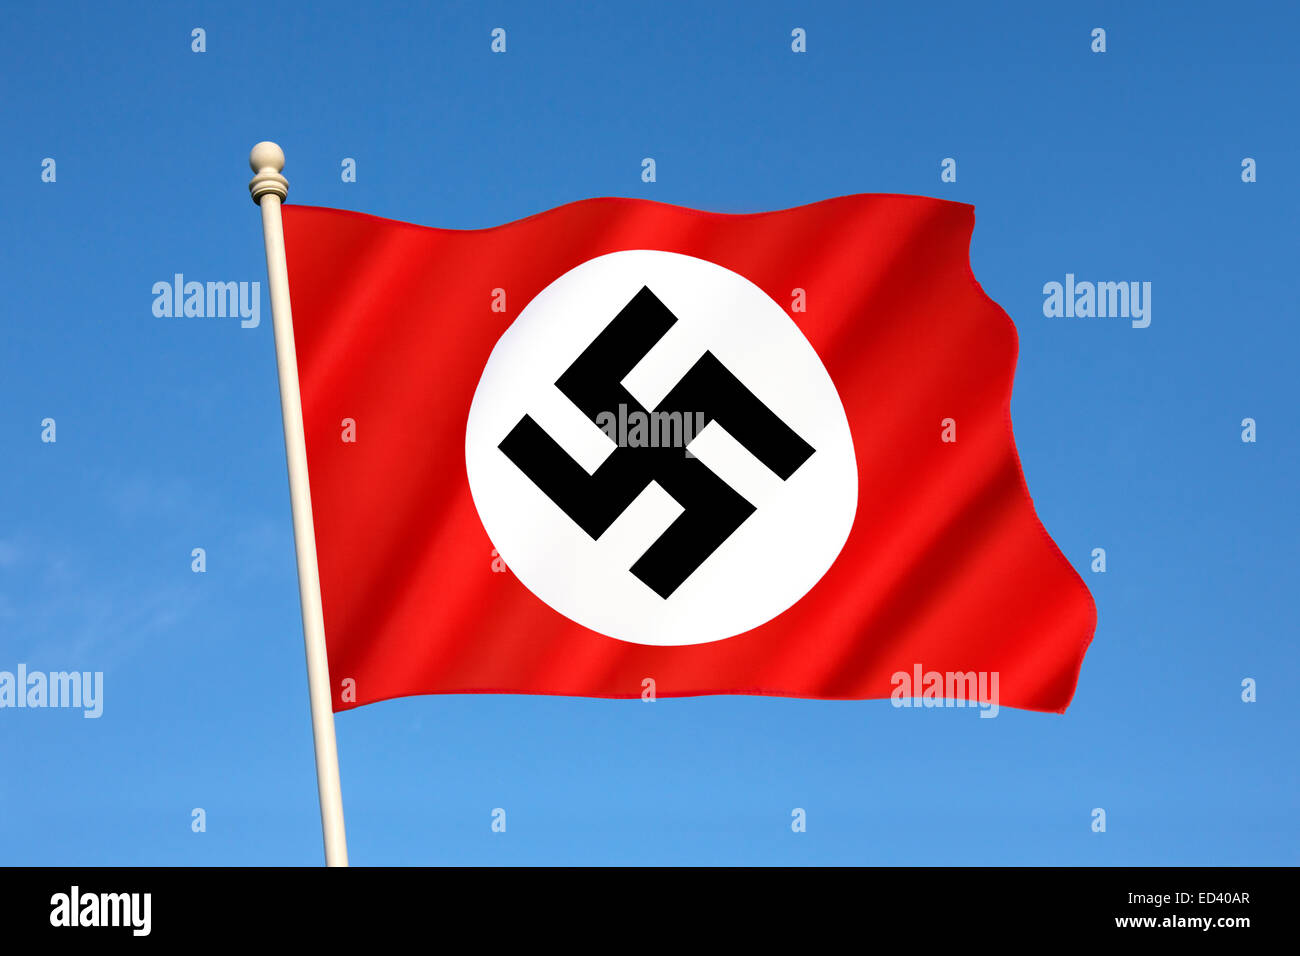 The Nazi Flag - Third Reich and World War II (1933 to 45) Stock Photo